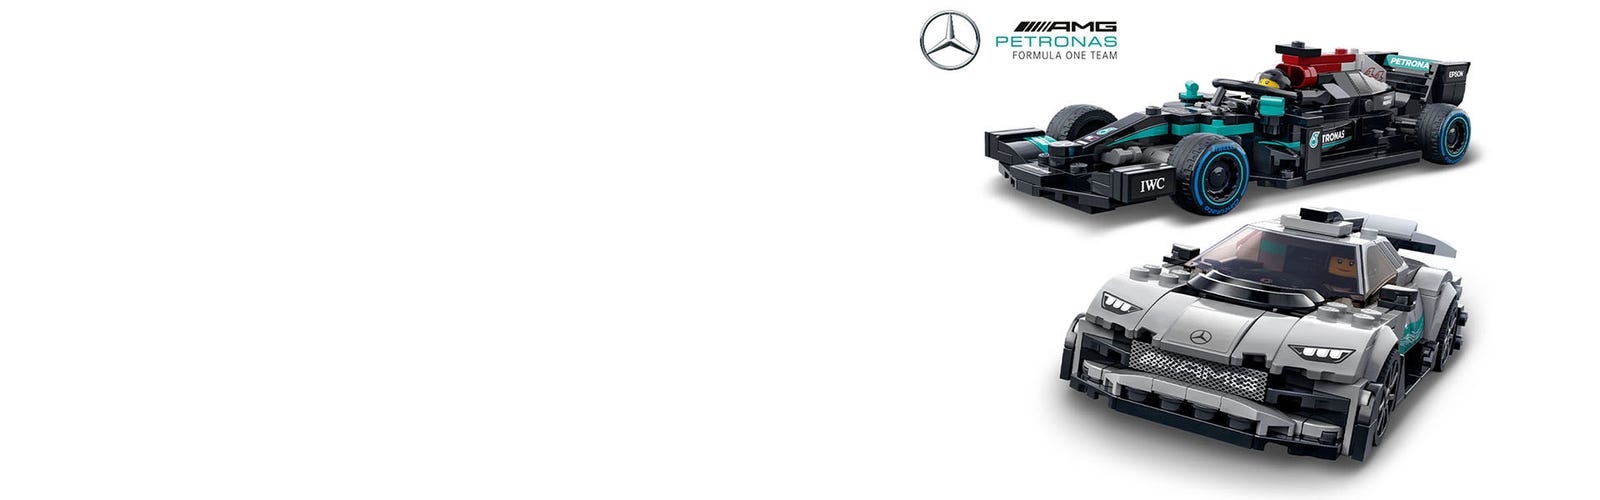 LEGO Speed Champions Mercedes-AMG F1 W12 E 76909 Performance & Project One  Toy Car Set, Mercedes Model Car Building Kit, Collectible Race Car Toy